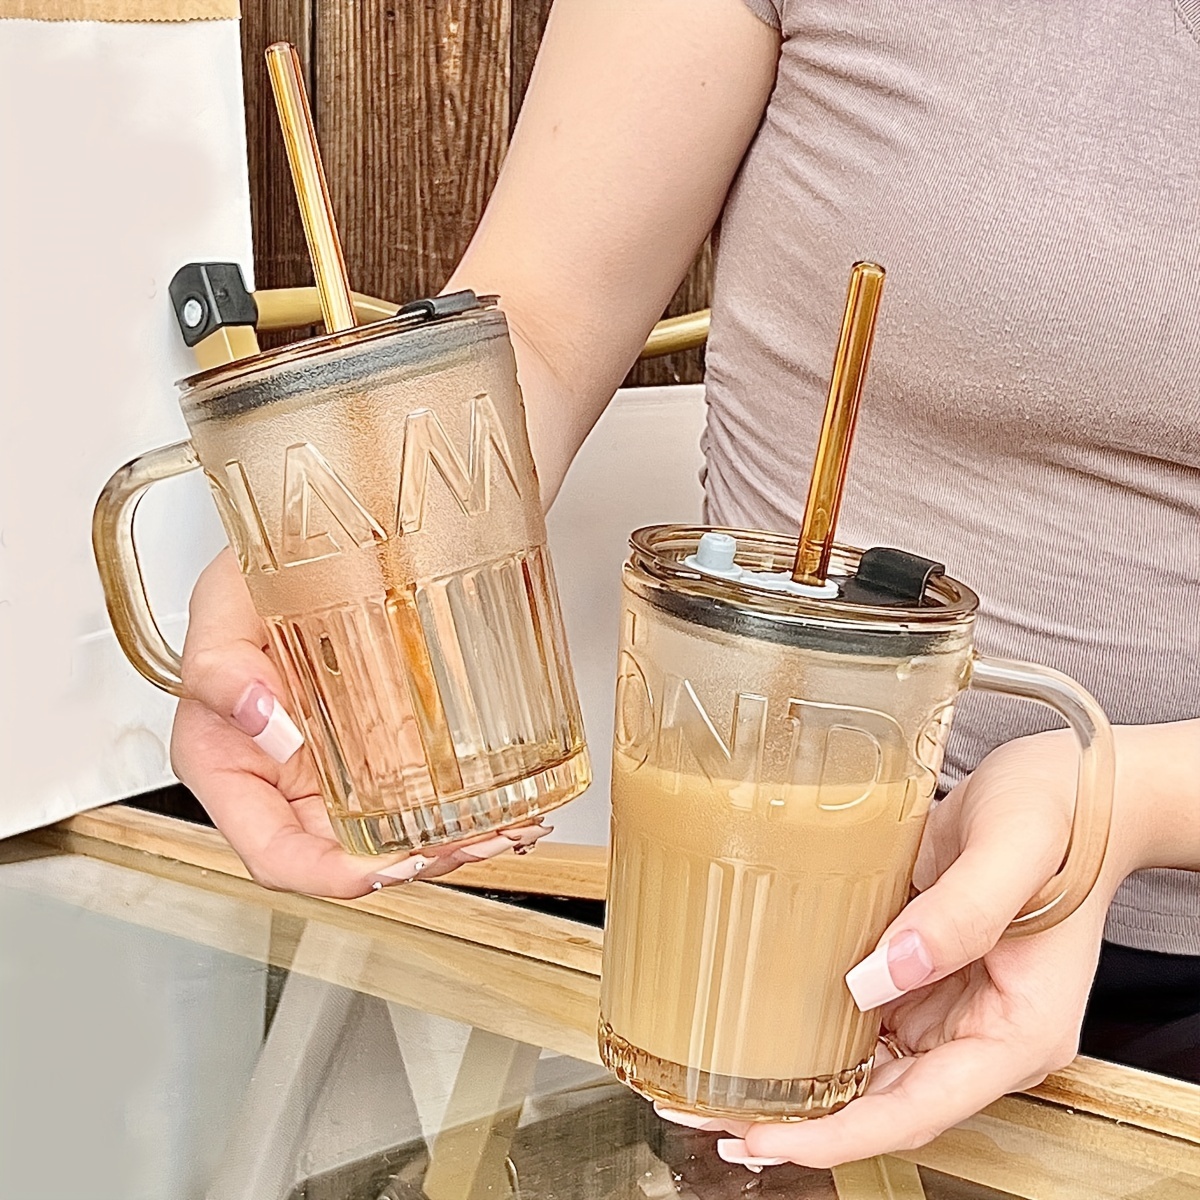 Glass Cup With Straw And Lid, 15.4oz (about 450g) Iced Coffee Cup, Water Cup,  Smoothie Cup, Aesthetic Couple Cup For Home Use